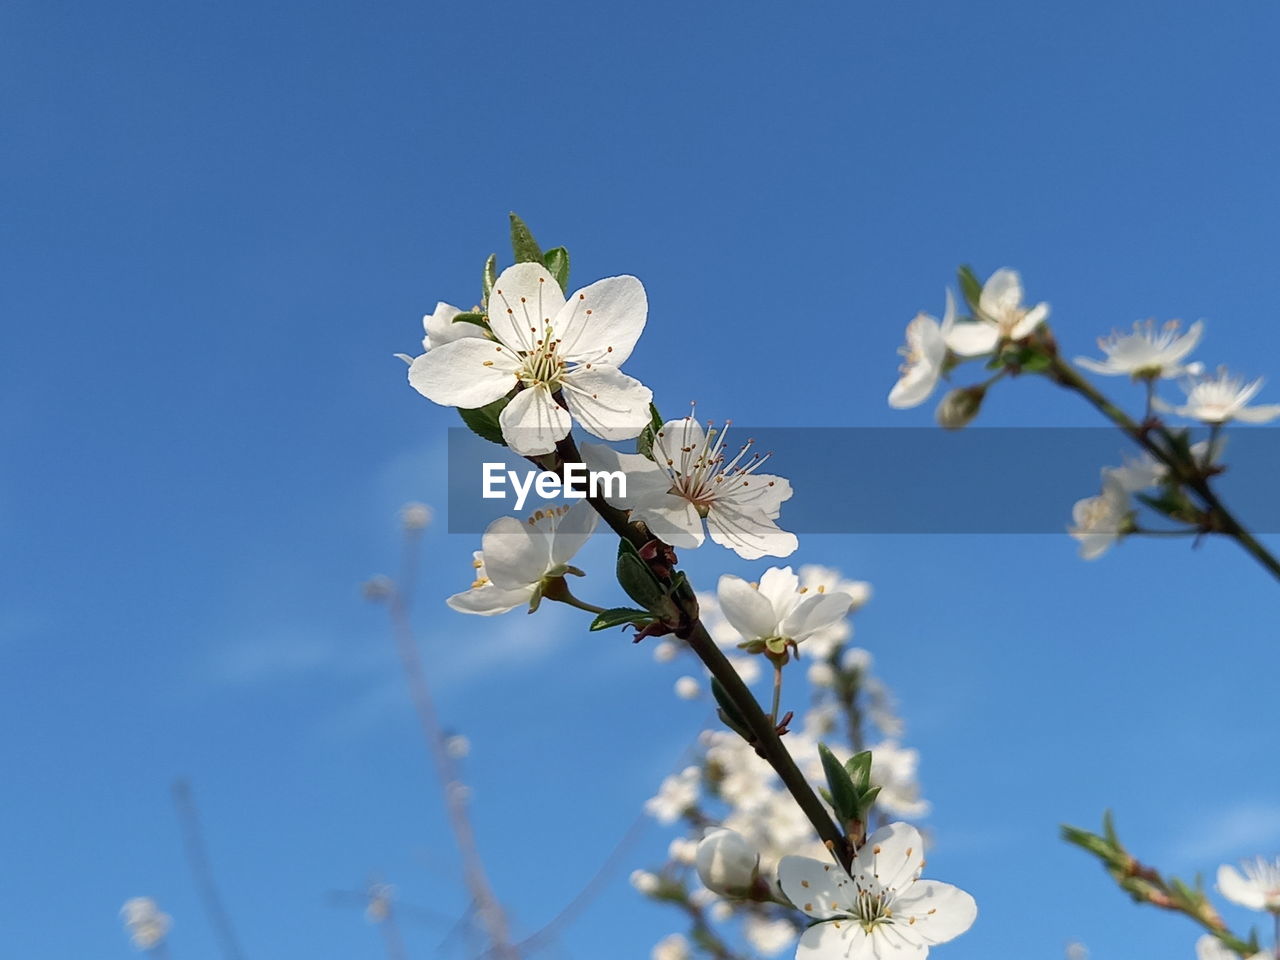 plant, flower, flowering plant, freshness, beauty in nature, fragility, blossom, springtime, sky, tree, nature, growth, blue, branch, white, close-up, clear sky, flower head, no people, inflorescence, produce, twig, fruit tree, petal, day, botany, outdoors, low angle view, cherry blossom, food, focus on foreground, apple tree, almond tree, sunny, macro photography, food and drink, spring, sunlight, apple blossom, agriculture